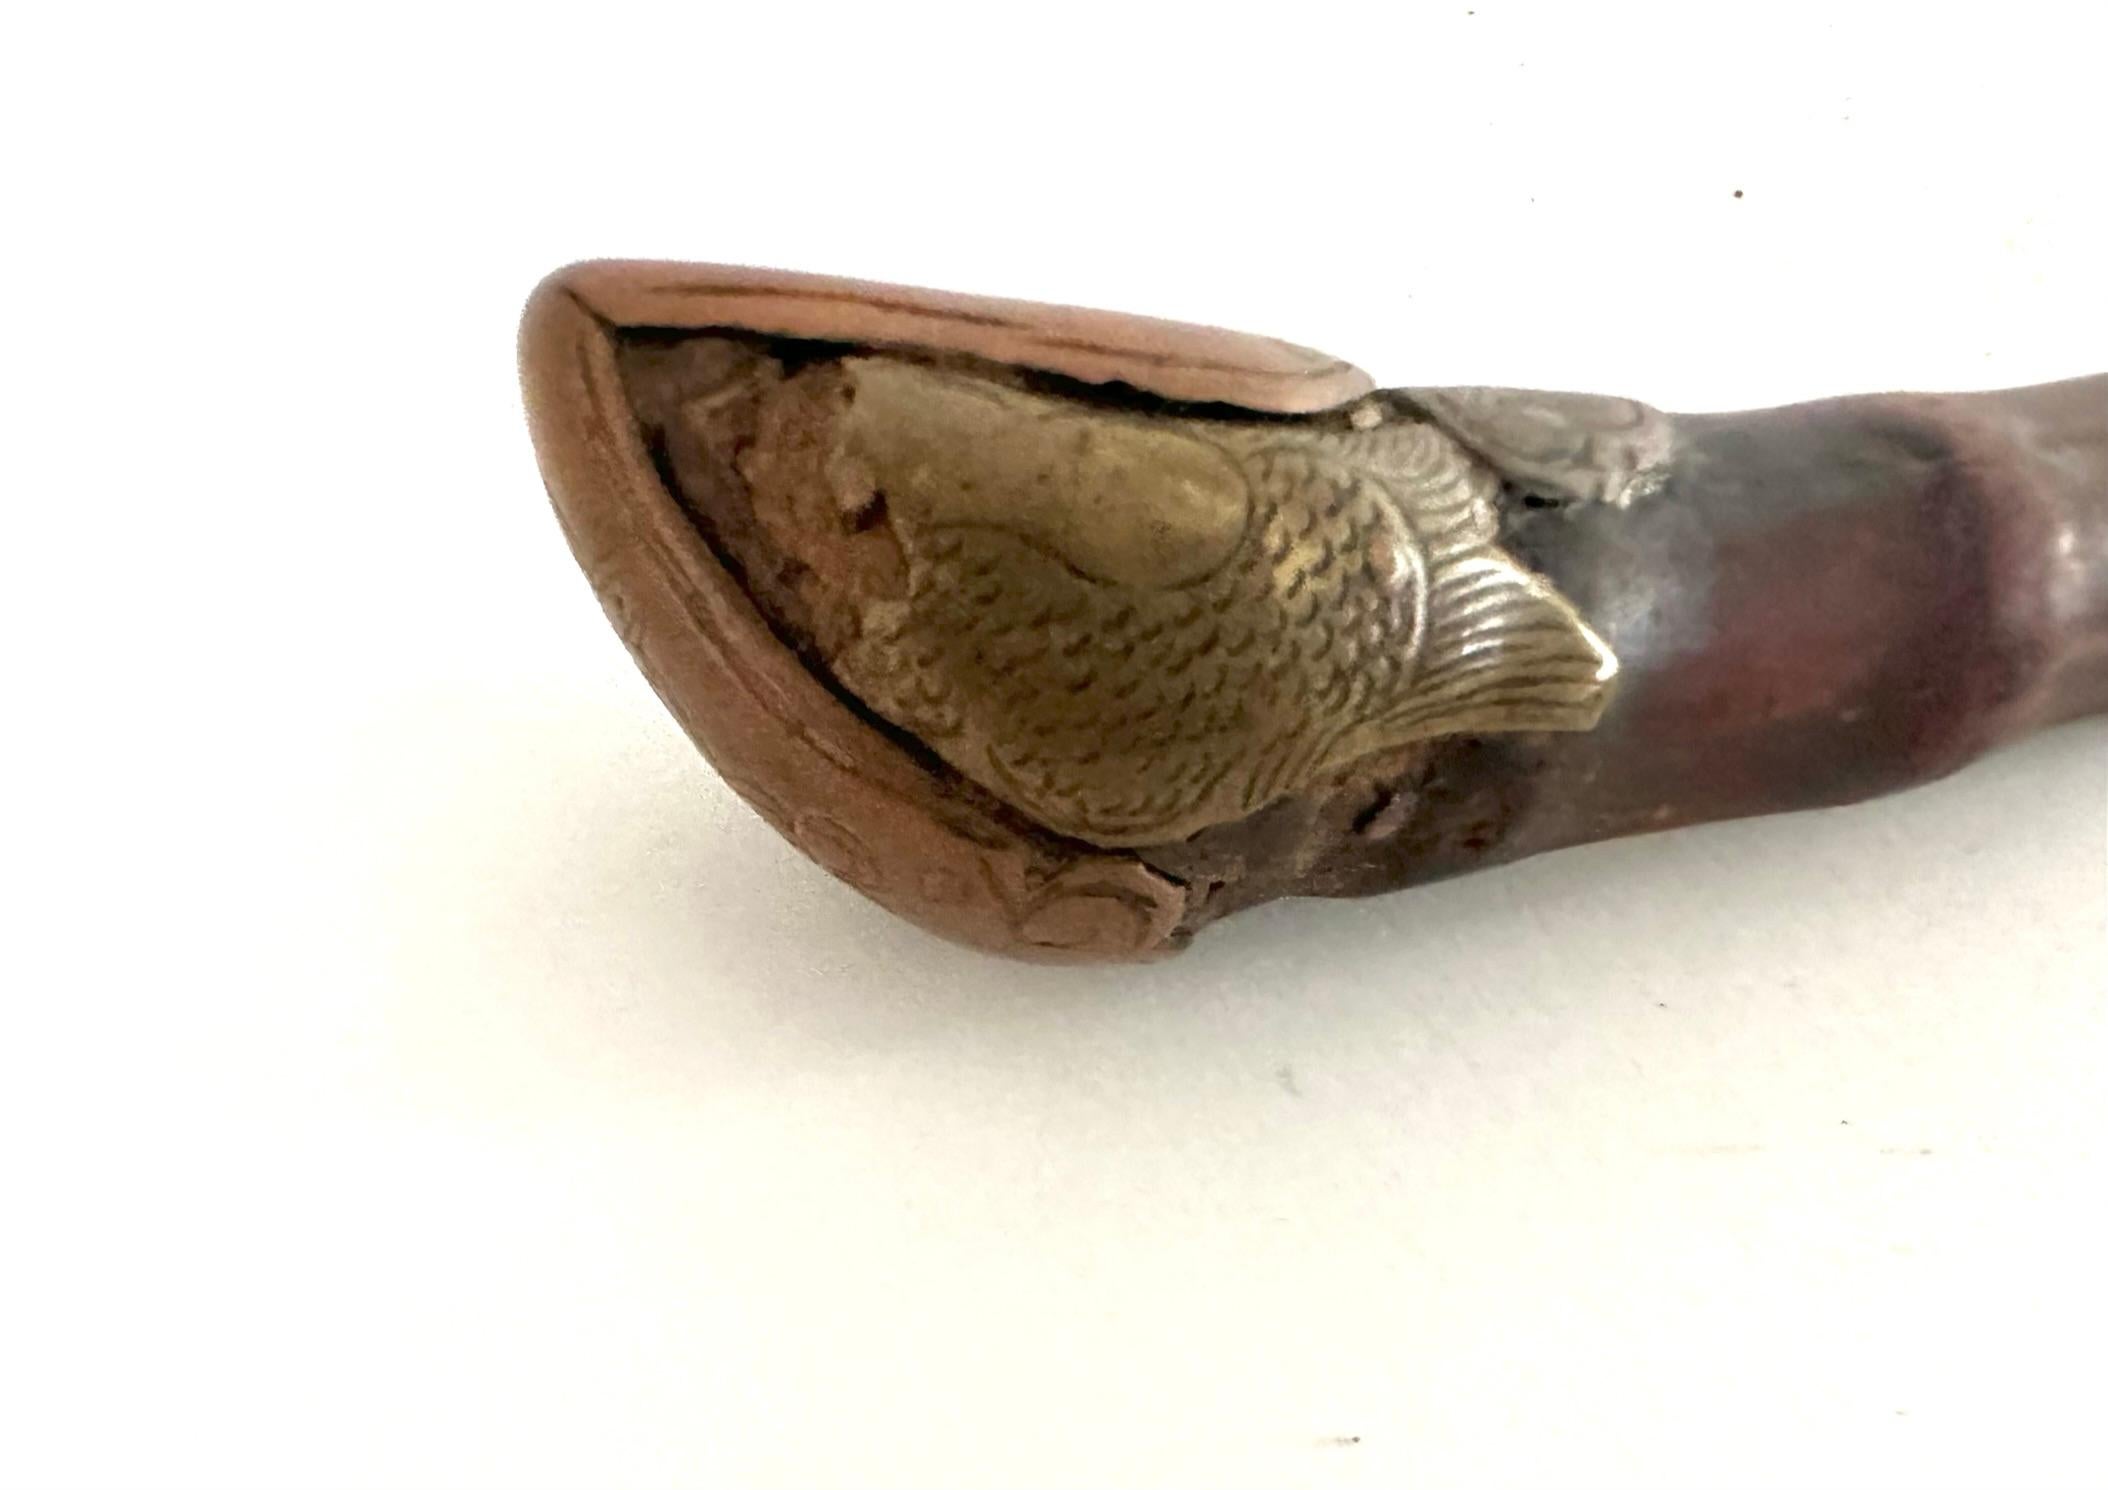 An opium pipe is a pipe designed specifically for the vaporization and inhalation of opium. But these beautiful little antiques have become one-of-a-kind works of art.
This late 19th century pipe is hand crafted from bamboo and brass. The pipe is